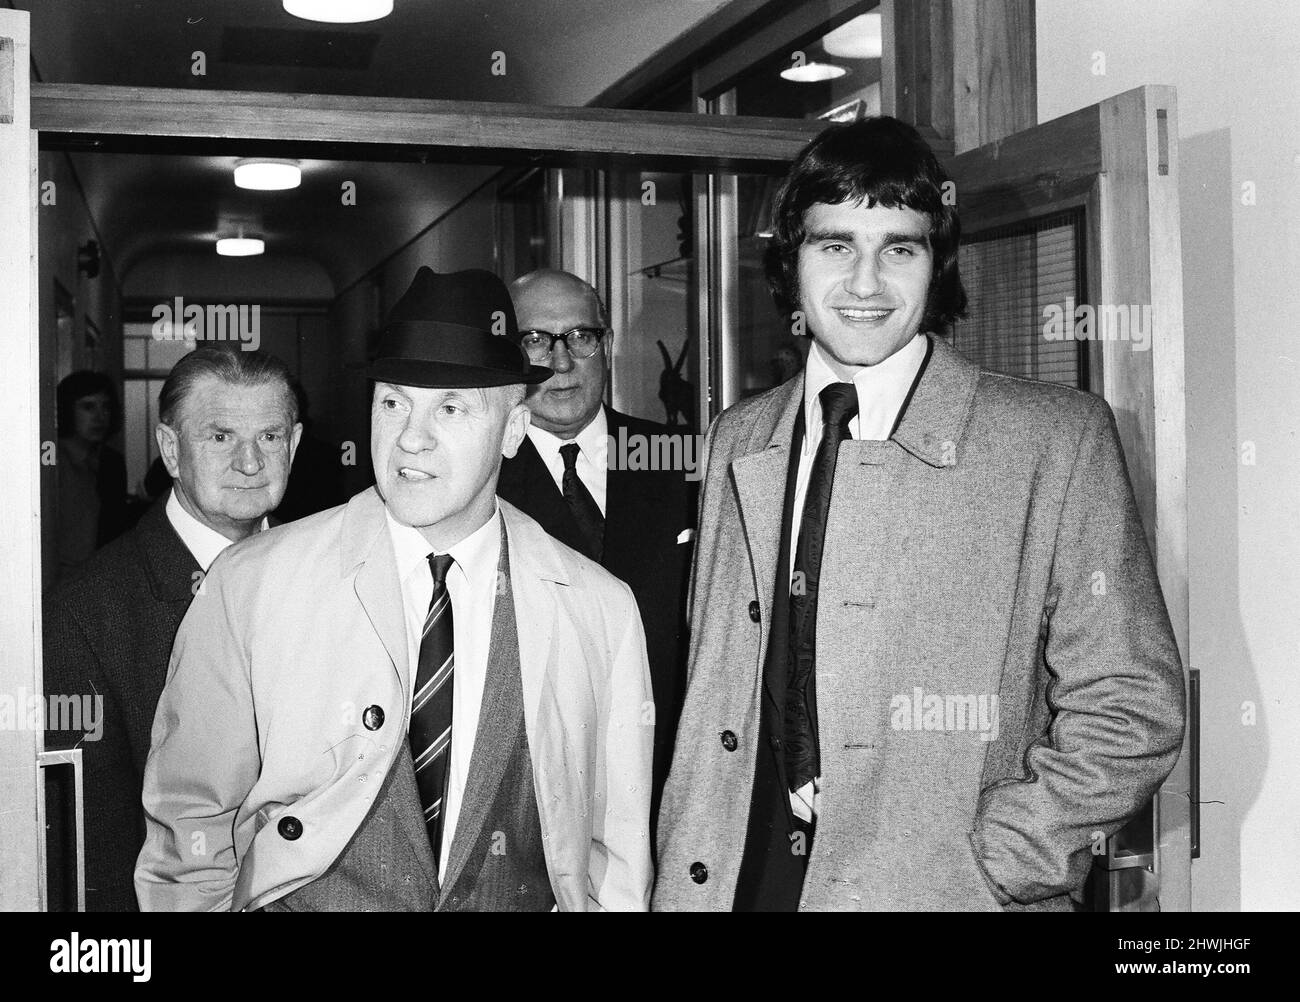 Larry Lloyd Liverpool centre half smiles as he leaves FA Headquarters at Lancaster Gate with manager Bill Shankly, after hearing good news from the disciplinary committee November 1972. Stock Photo